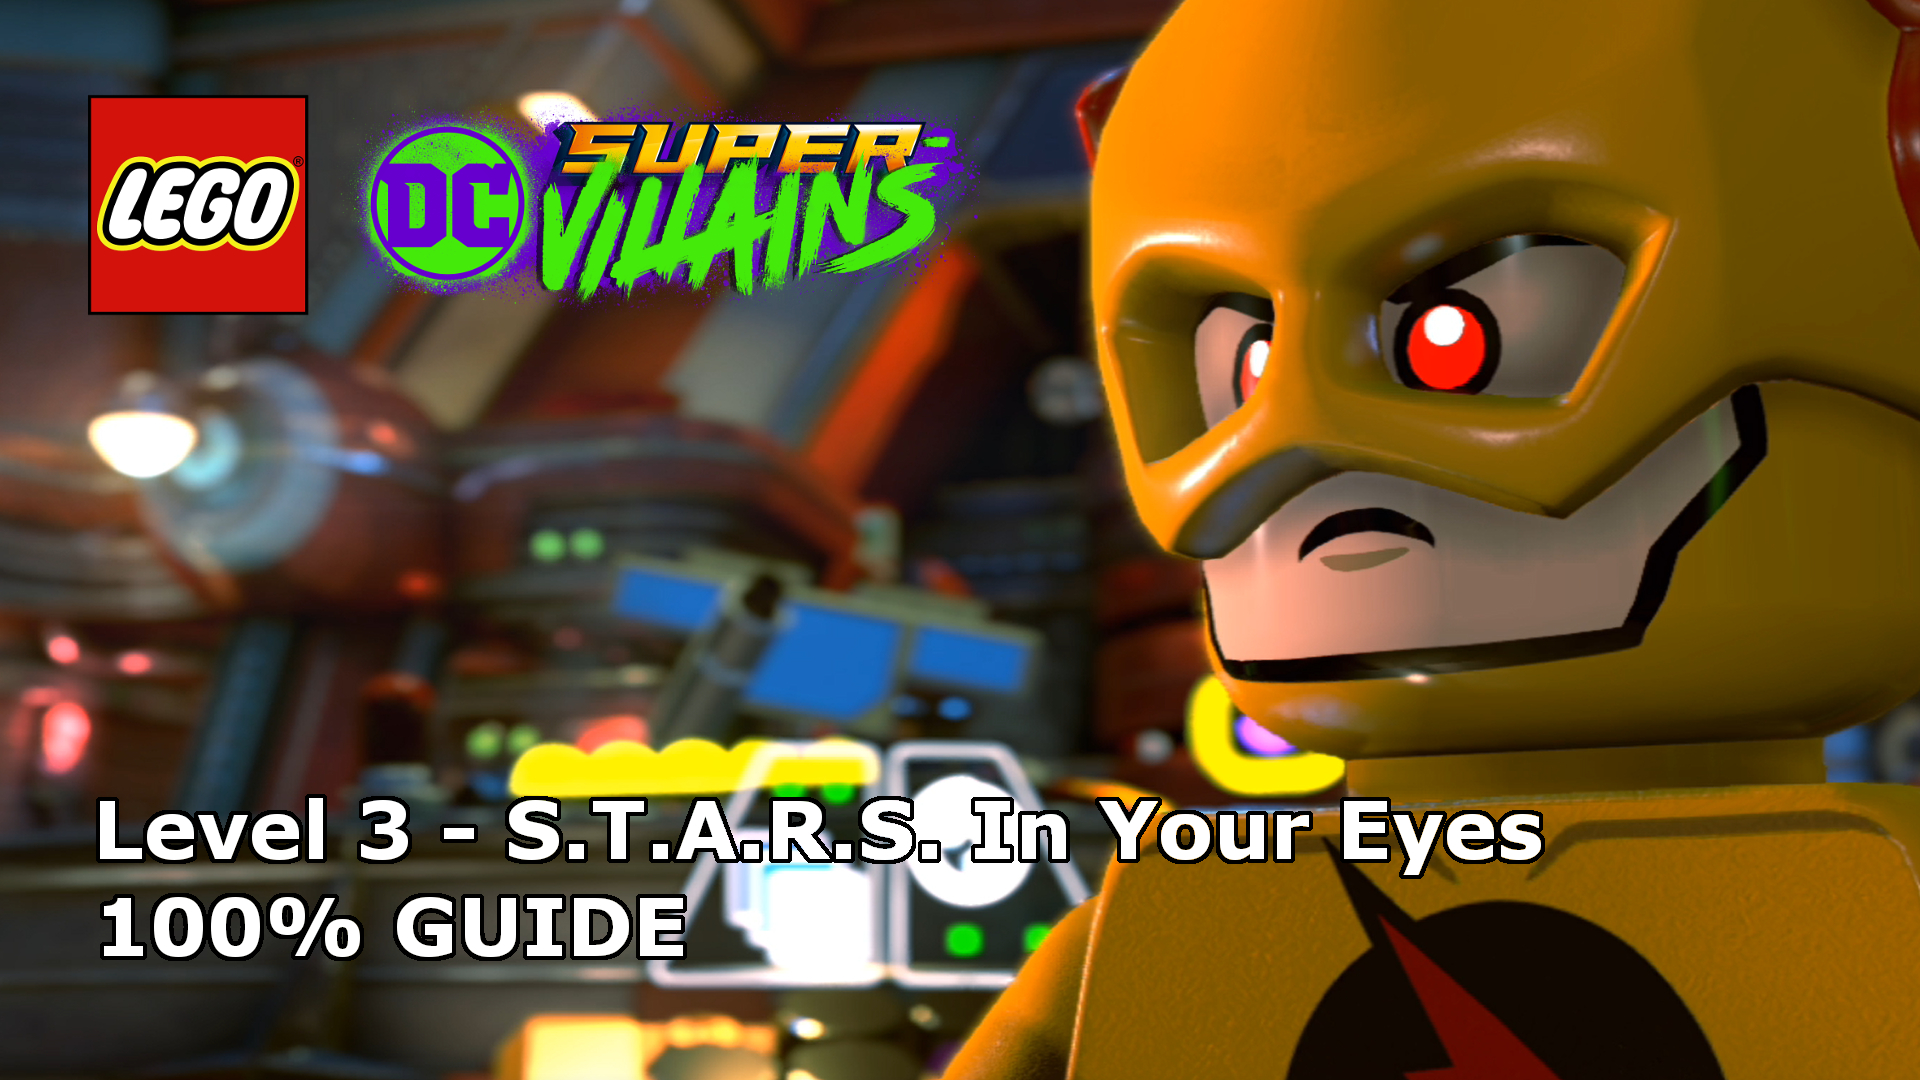 LEGO DC Super-Villains – S.T.A.R.S. In Your Eyes 100% Guide